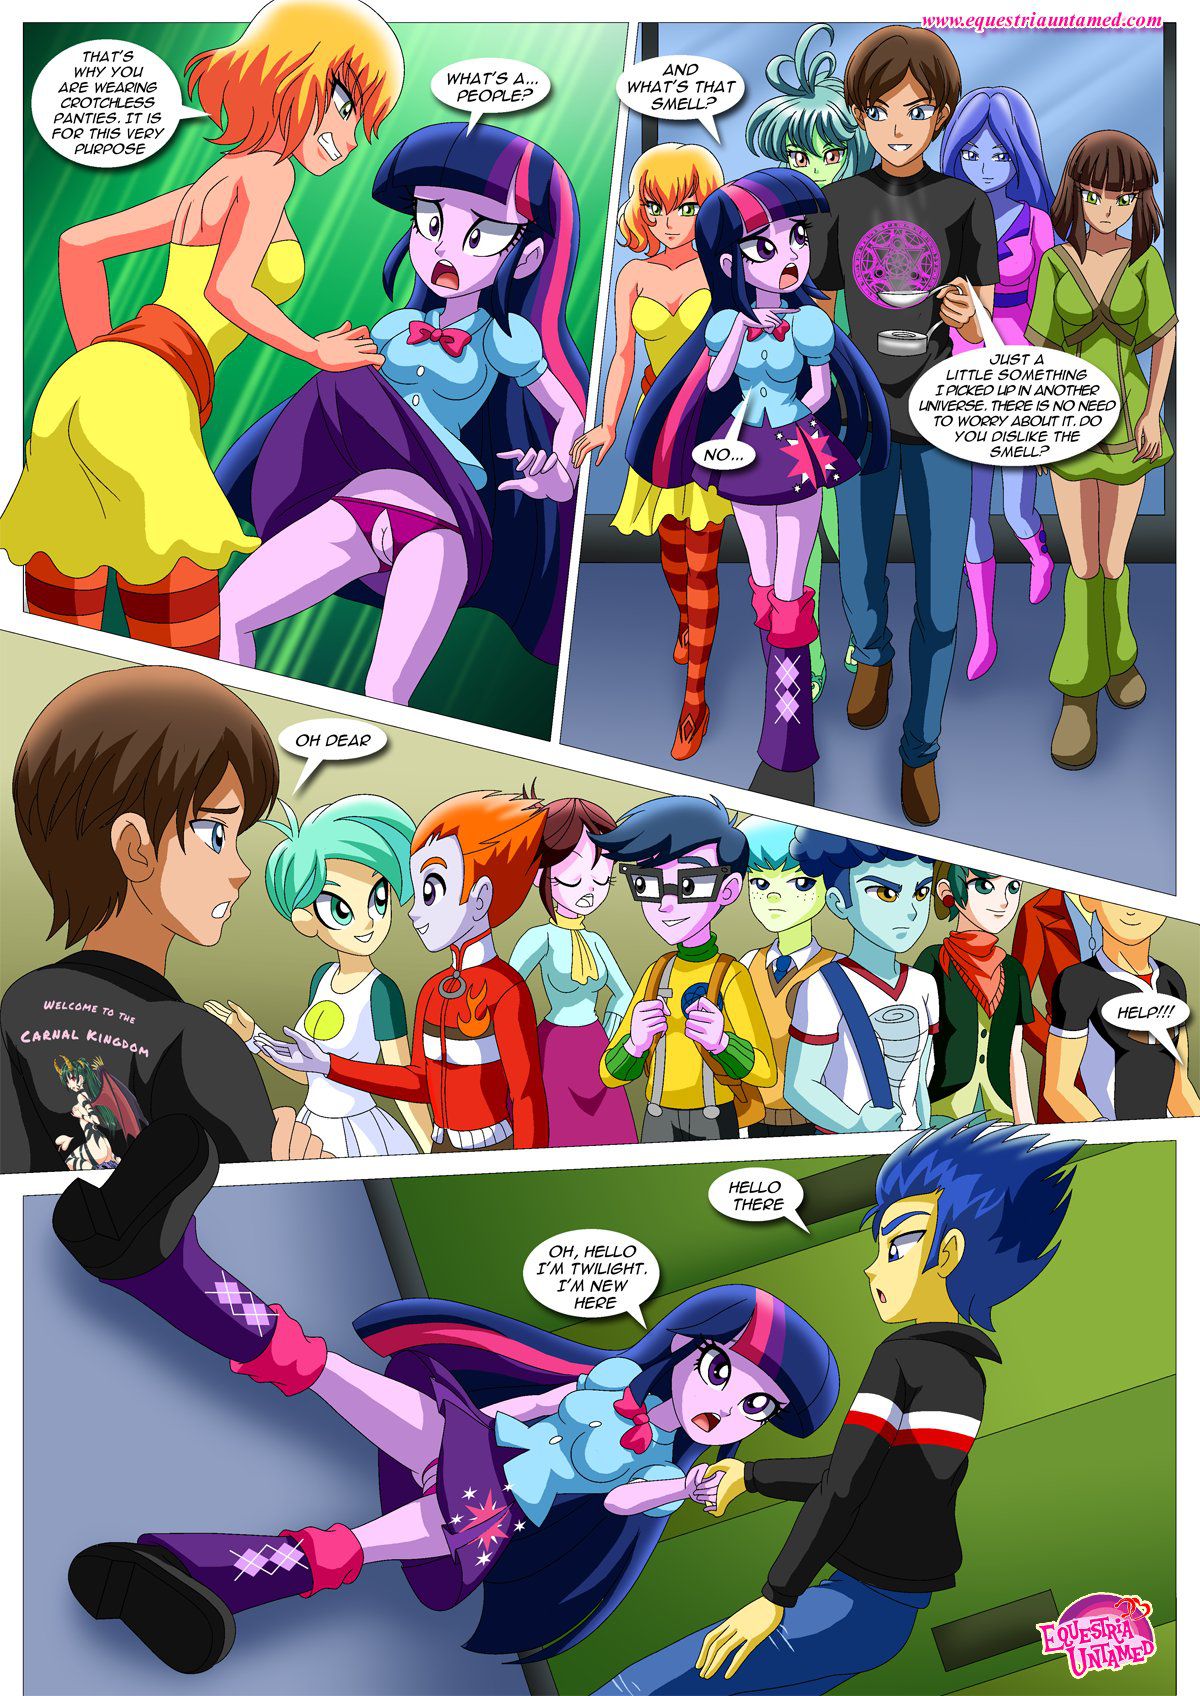 [Palcomix] Equestria Girls Unleashed (My Little Pony Friendship is Magic) [Ongoing] 3